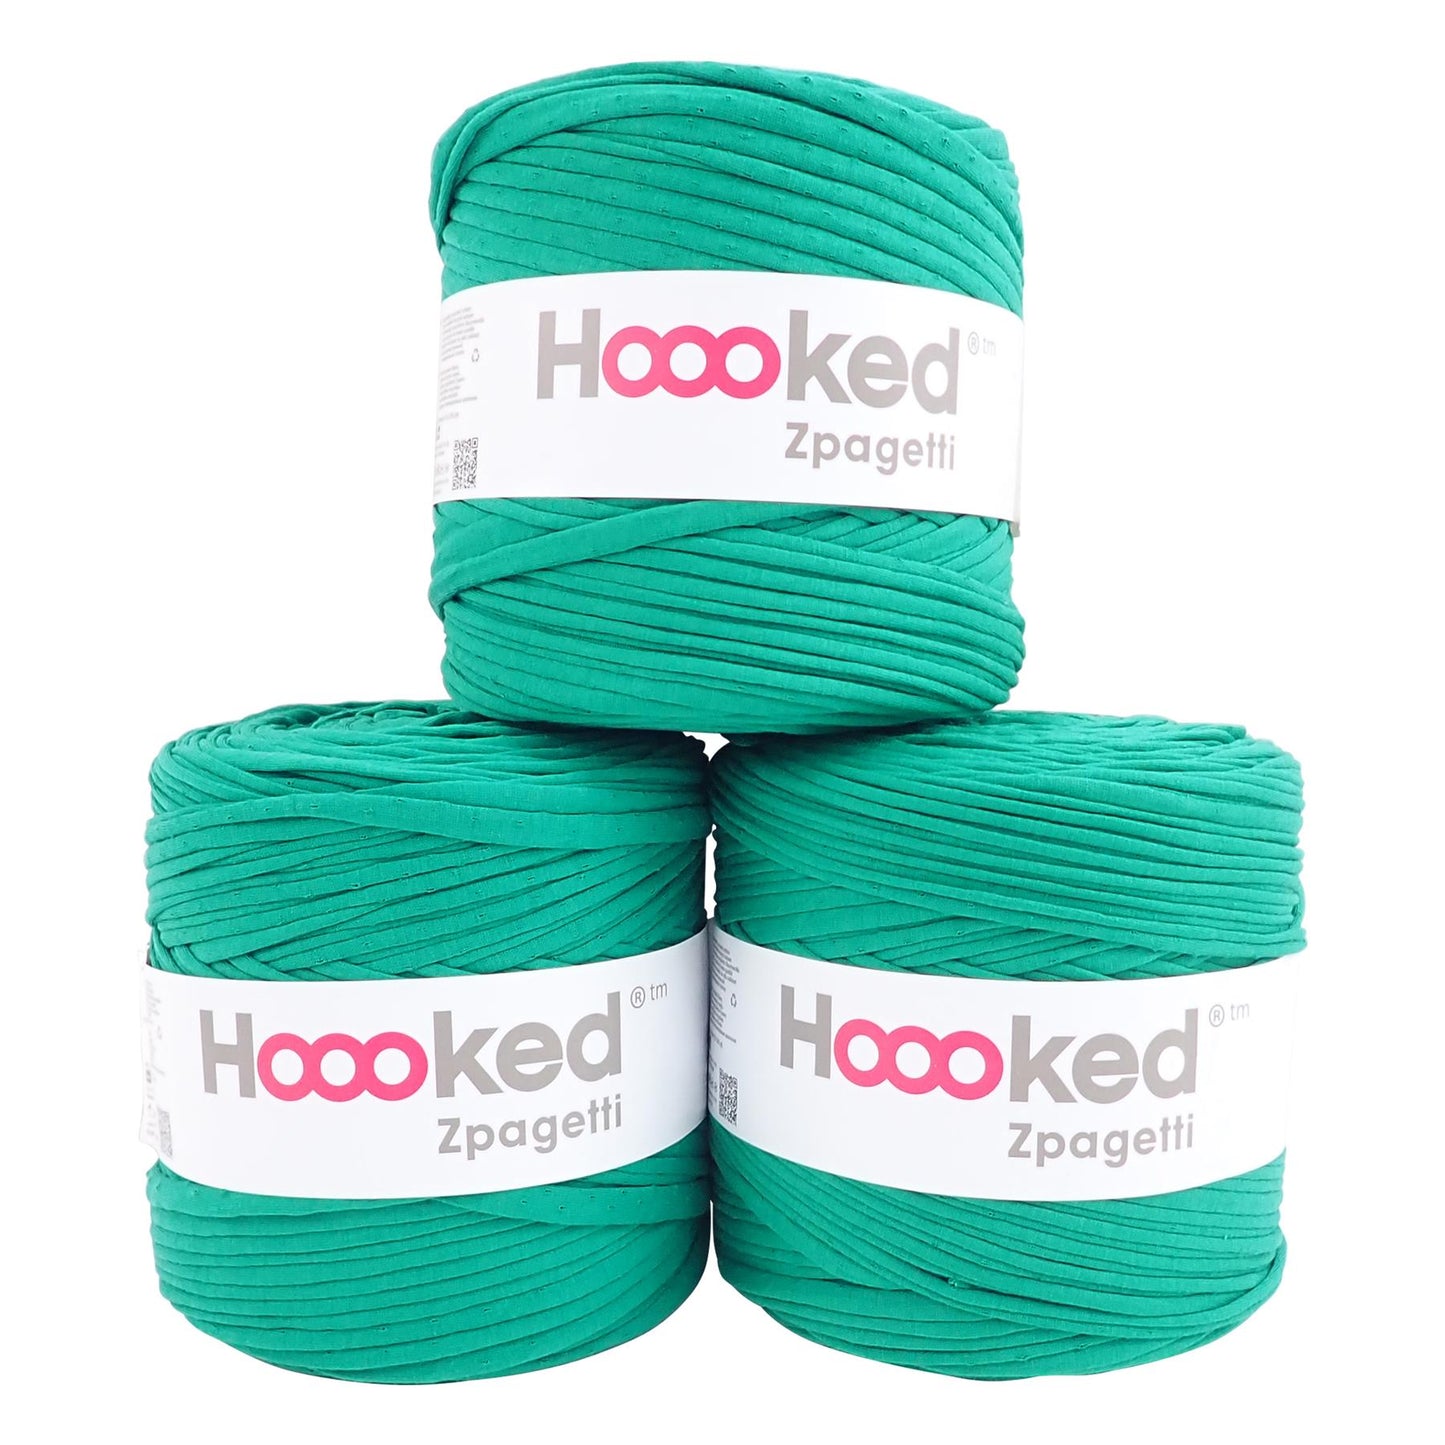 Hoooked Zpagetti Green Cotton T-Shirt Yarn - 120M 700g (Pack of 3)